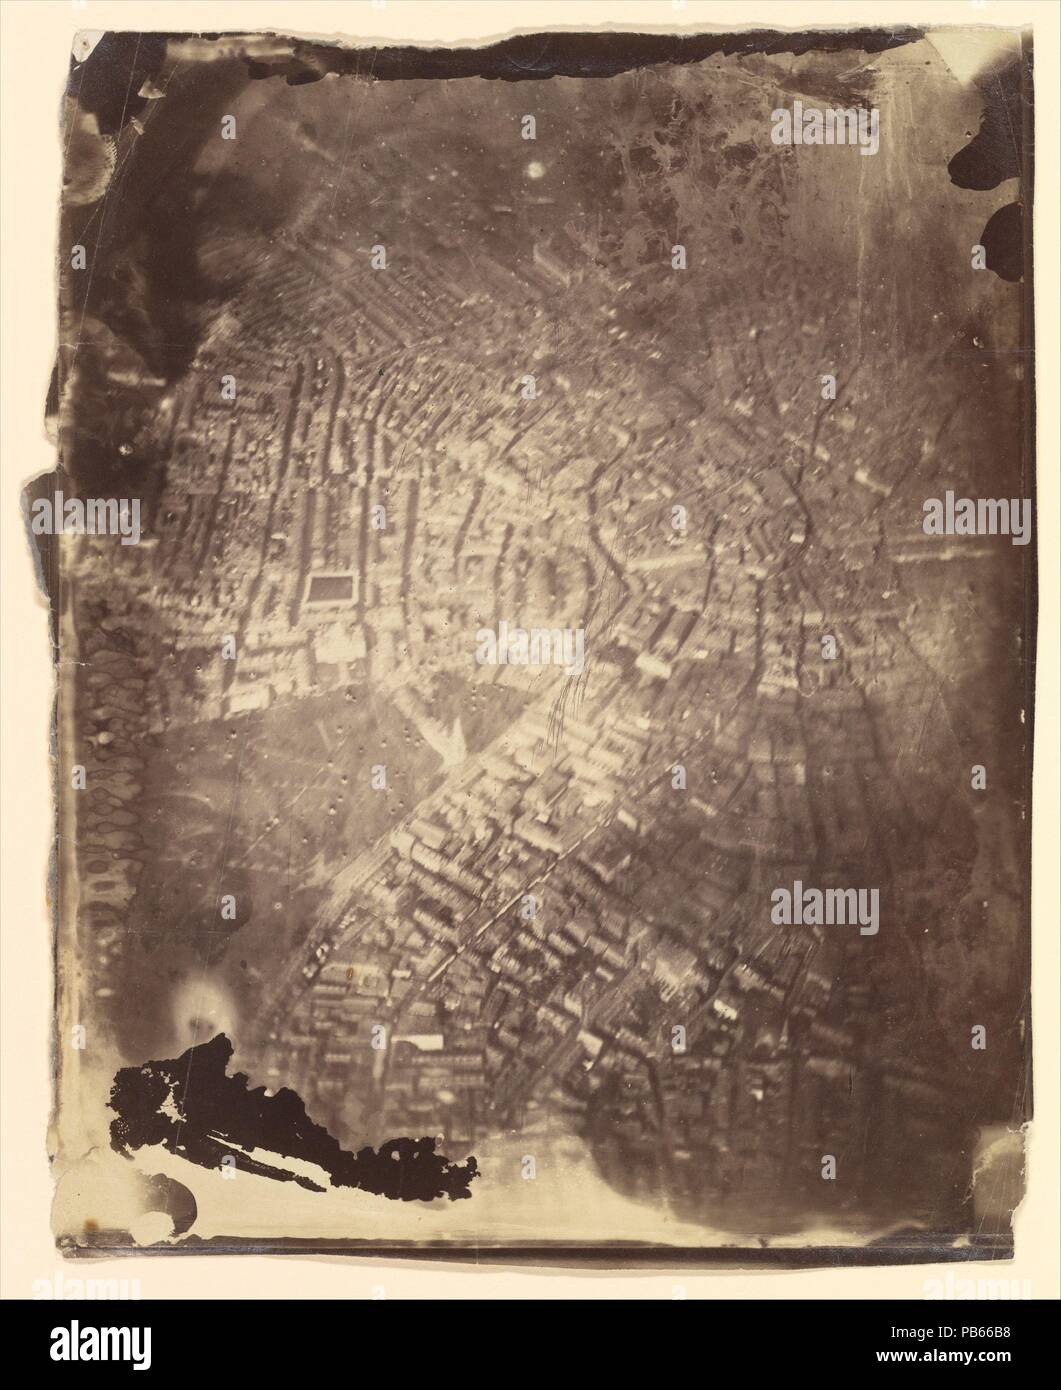 [Boston from a Hot-Air Balloon]. Artist: James Wallace Black (American, 1825-1896). Dimensions: 25.6 x 20.2 cm. (10  1/16  x 7  15/16  in.). Date: 1860s.  Two years after the French photographer Nadar conducted his earliest experiments in balloon flight, the Boston photographer James Wallace Black ascended over the city to make the first successful aerial photographs in America. He flew on Samuel King's hot-air balloon, the 'Queen of the Air,' and exposed several glass-plate negatives, including this extraordinary, if imperfect, view-as much lunar landscape as 'Beantown.' Almost immediately, a Stock Photo